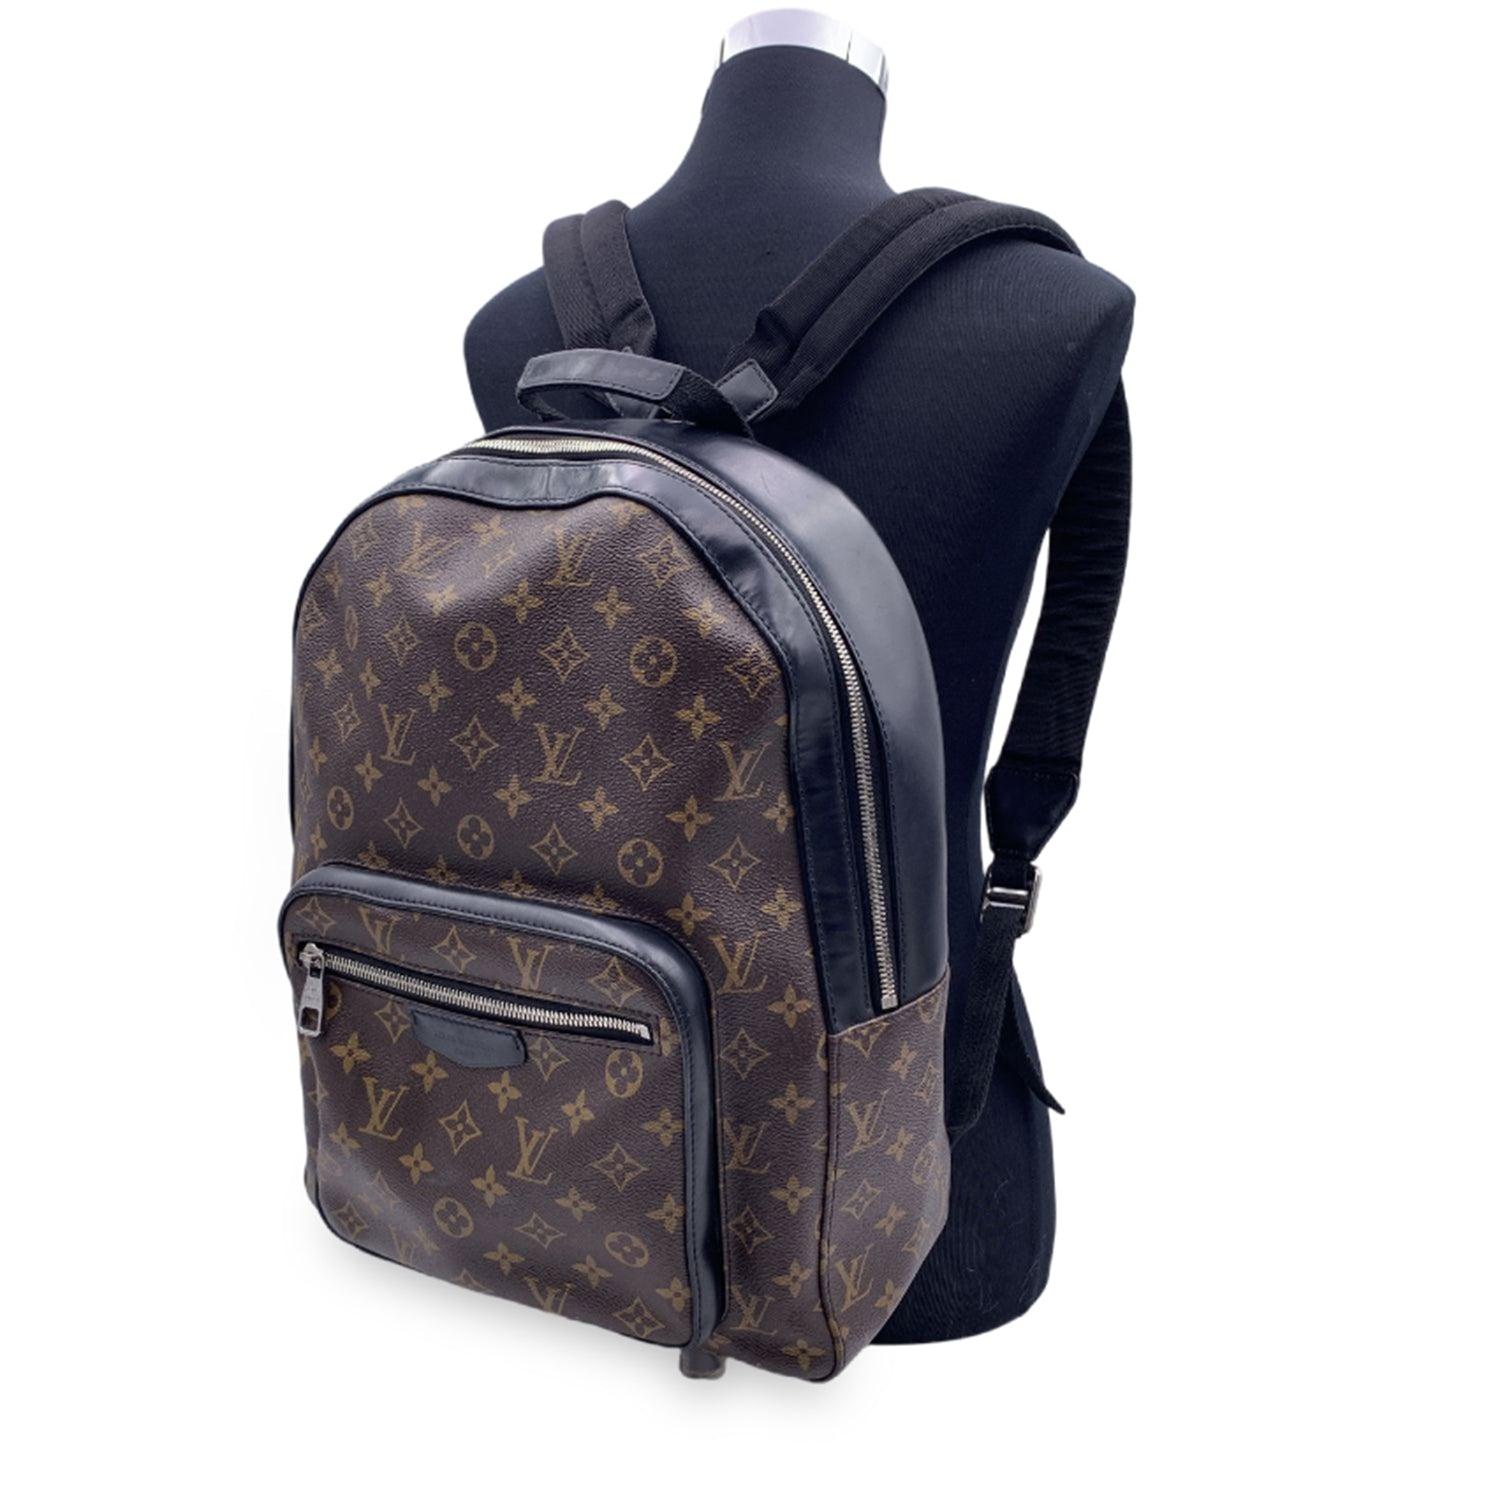 This beautiful Bag will come with a Certificate of Authenticity provided by Entrupy. The certificate will be provided at no further cost Louis Vuitton Monogram Macassar'Josh' Backpack bag, casual and sophisticated at the same time. Monogram canvas